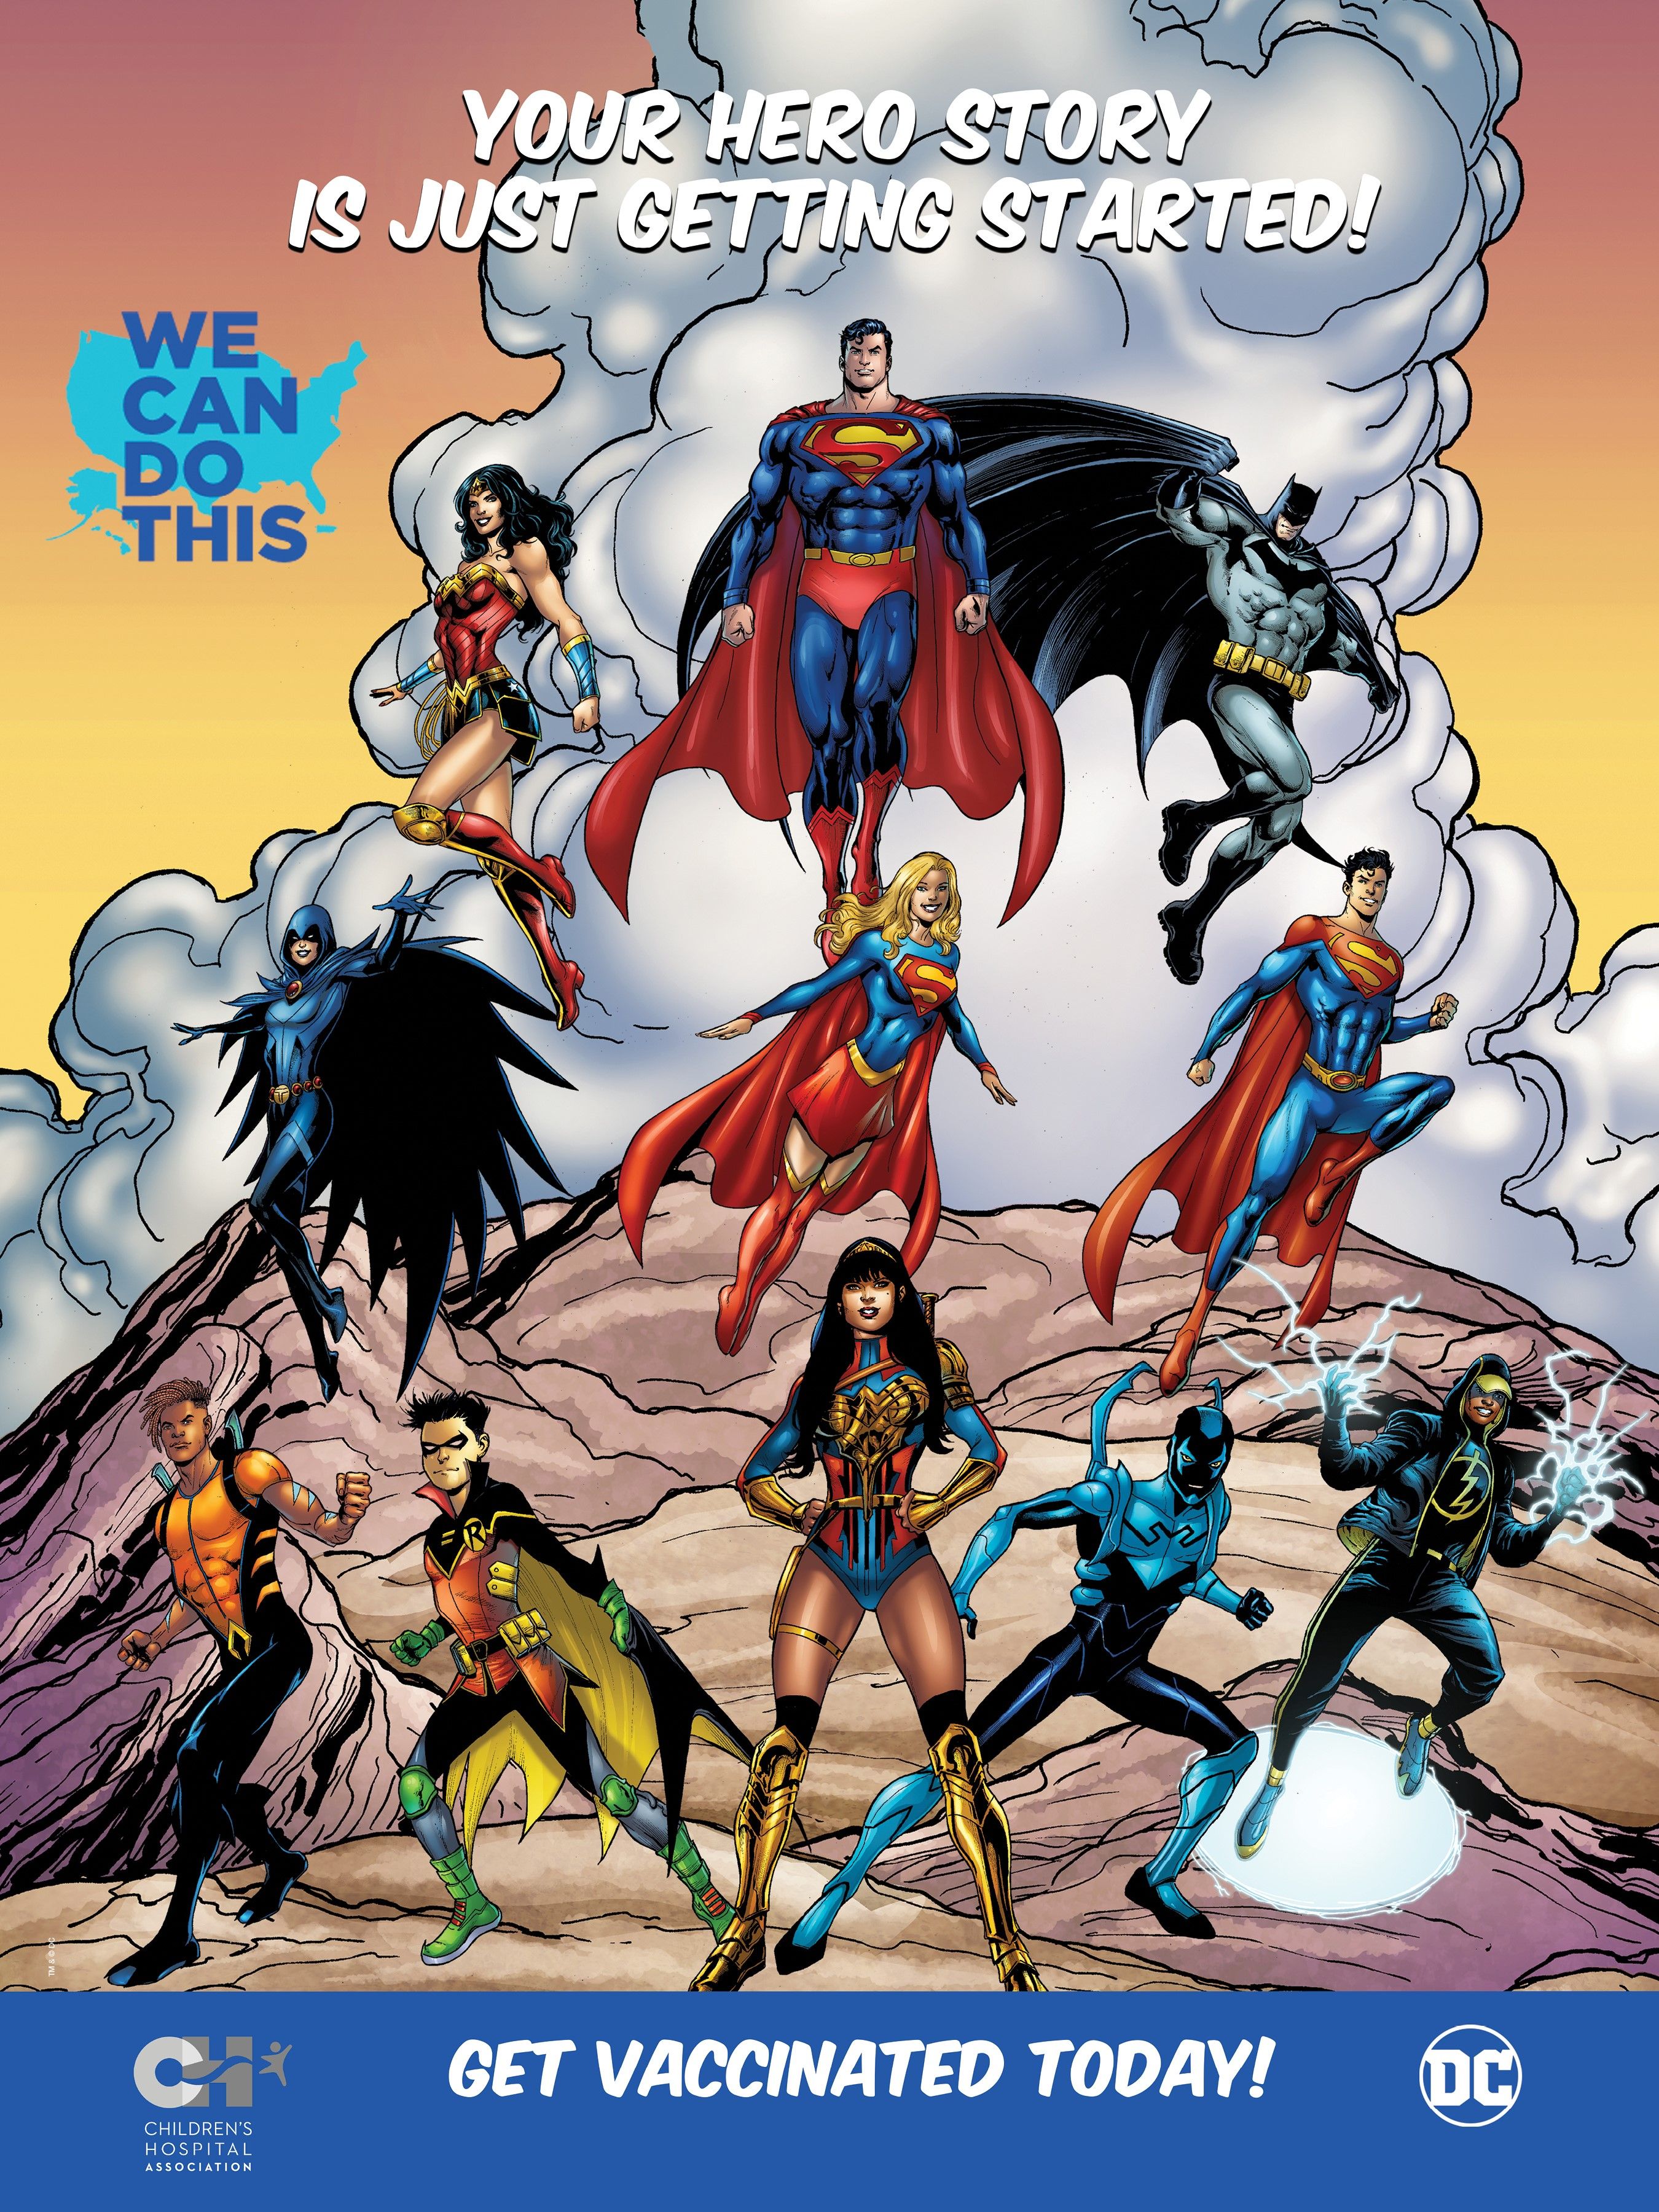 DC Super Heroes poster promoting vaccinations for children, for Children's Hospitals